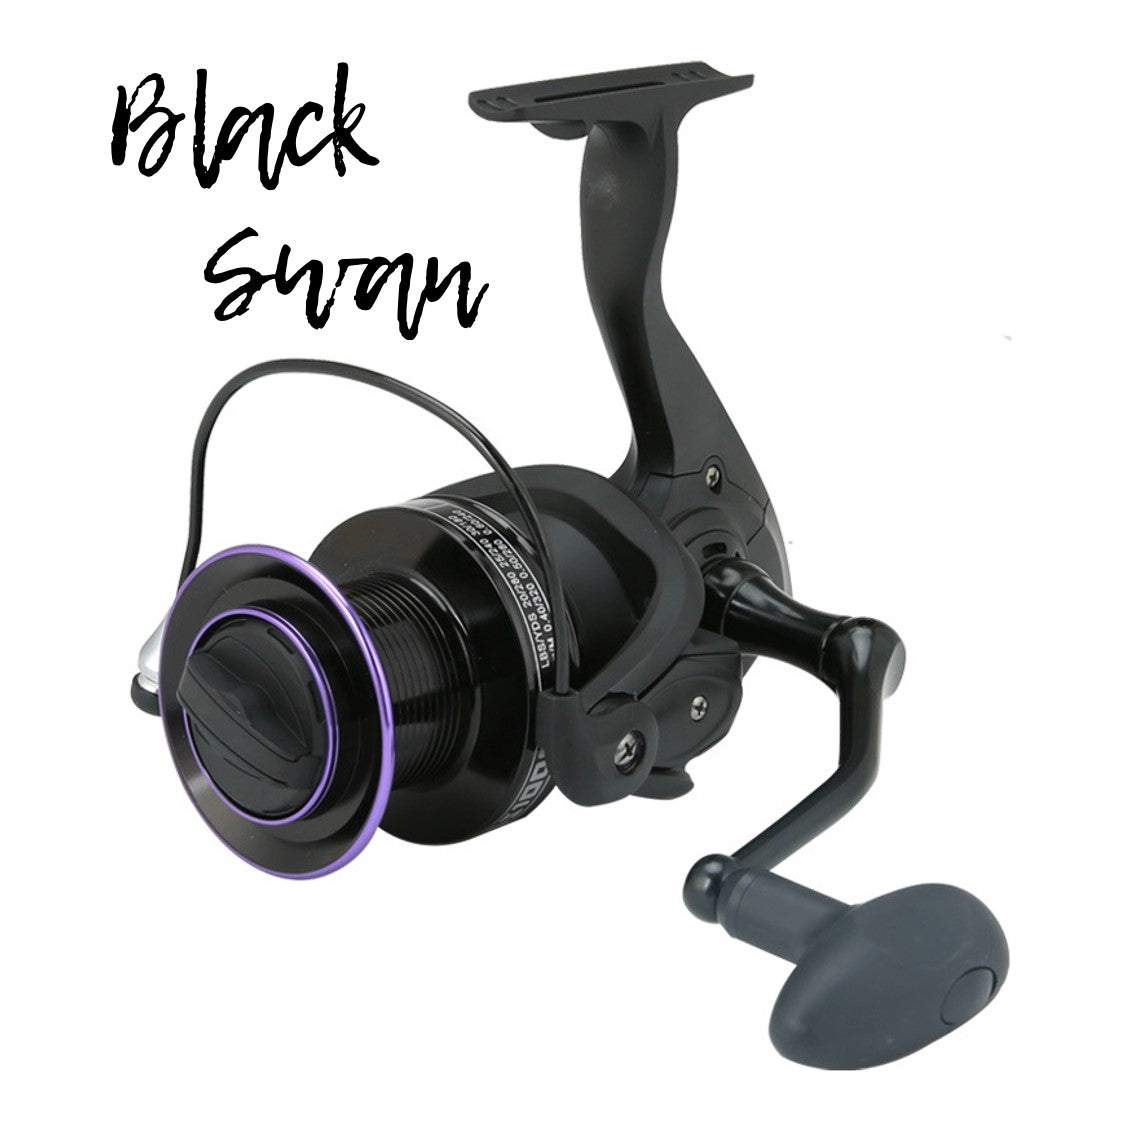 Black swan Surf casting Spinning reel – WBQ Tackle supplies